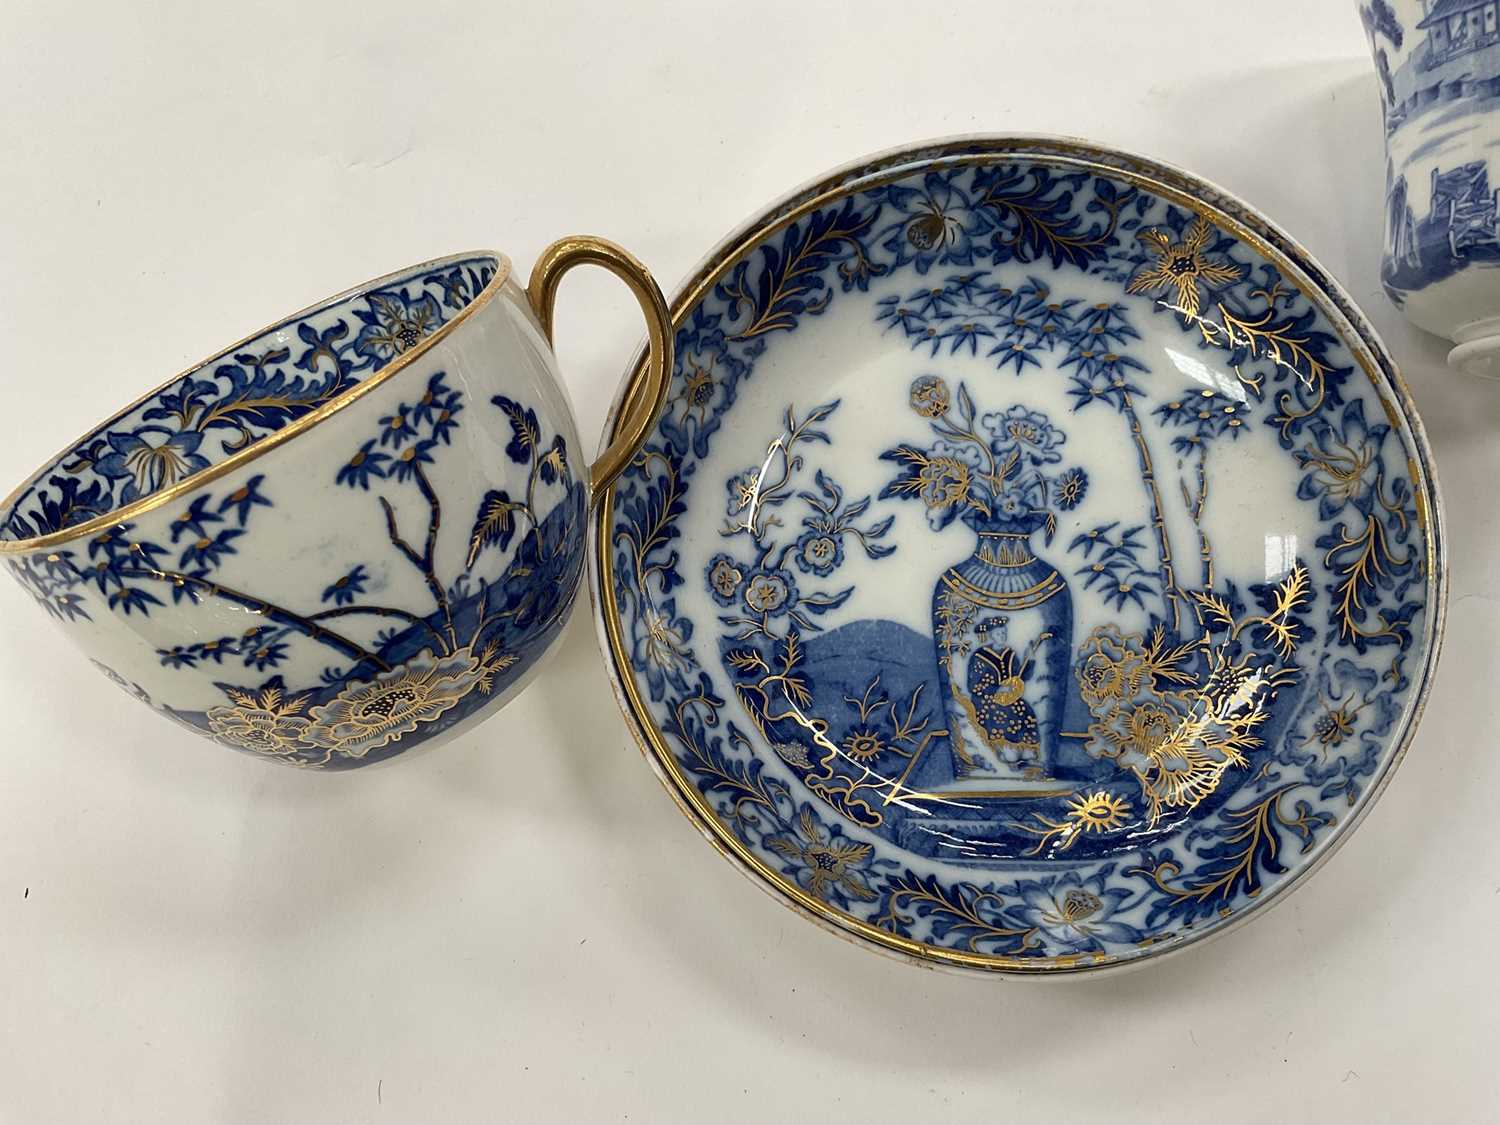 Wedgwood blue printed coffee cup and saucer, and another blue printed trio - Image 3 of 6